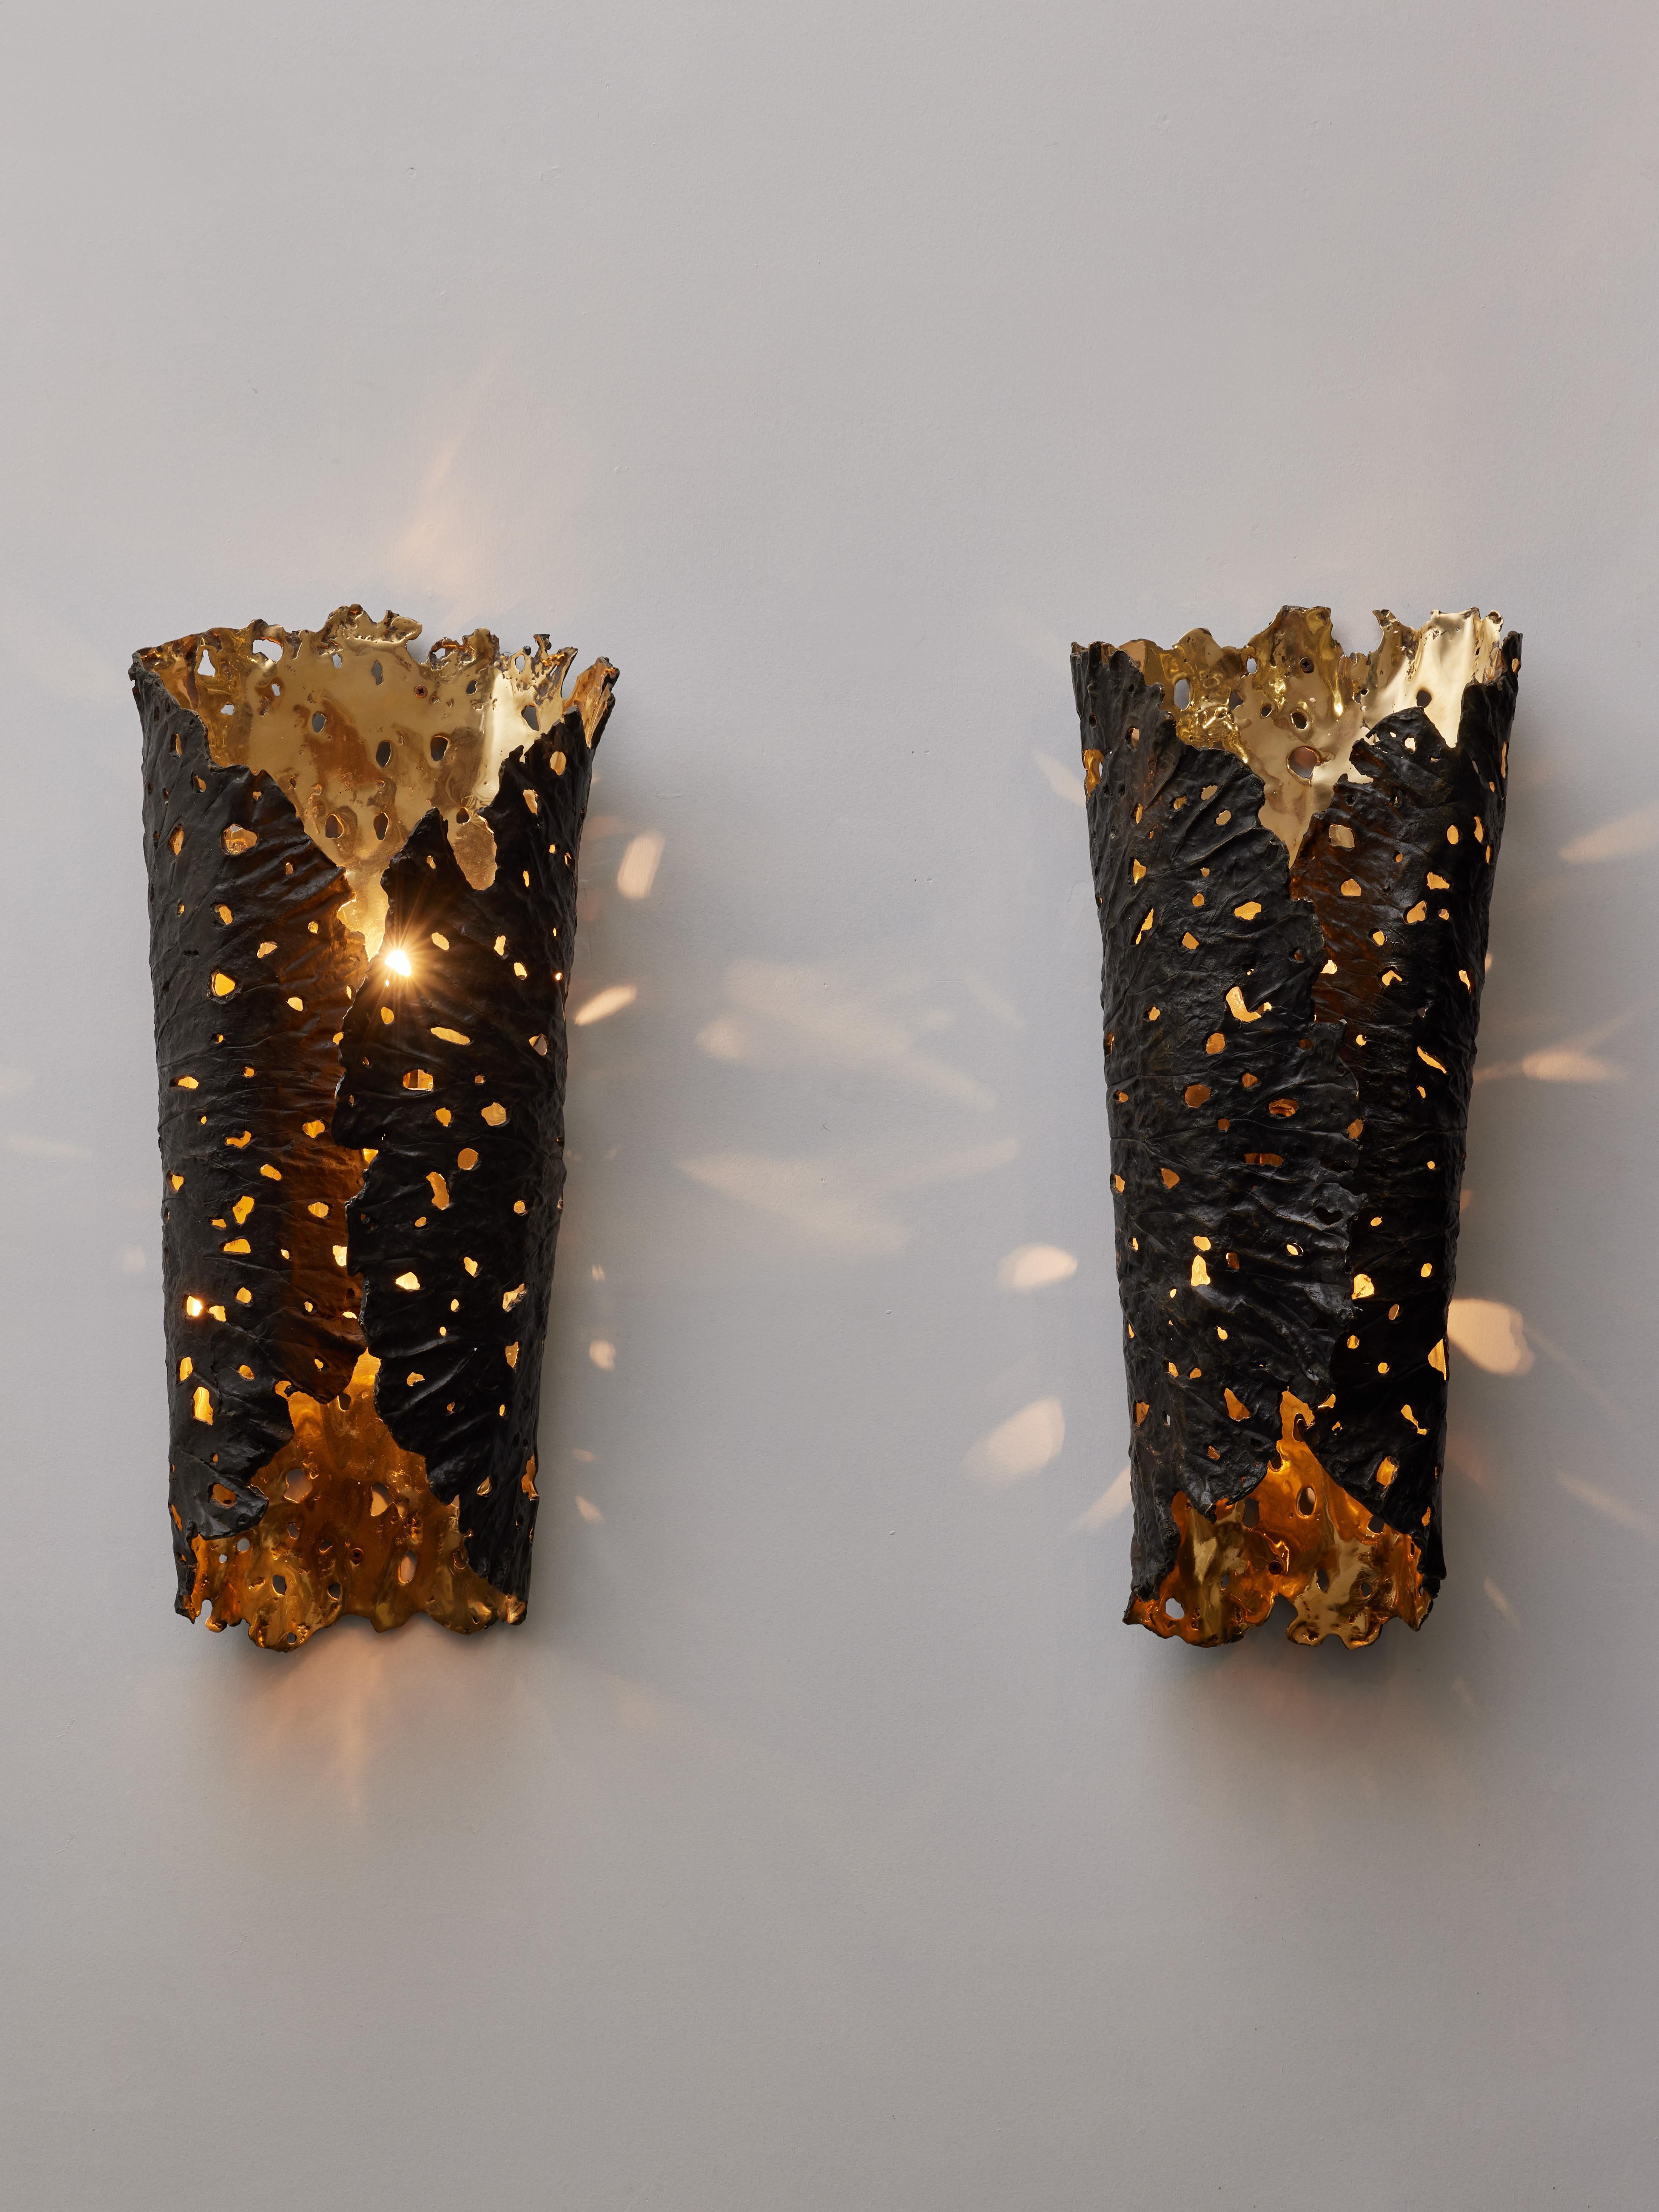 Pair of sconces in sculpted and patinated sconces.
Creation by Studio Glustin.